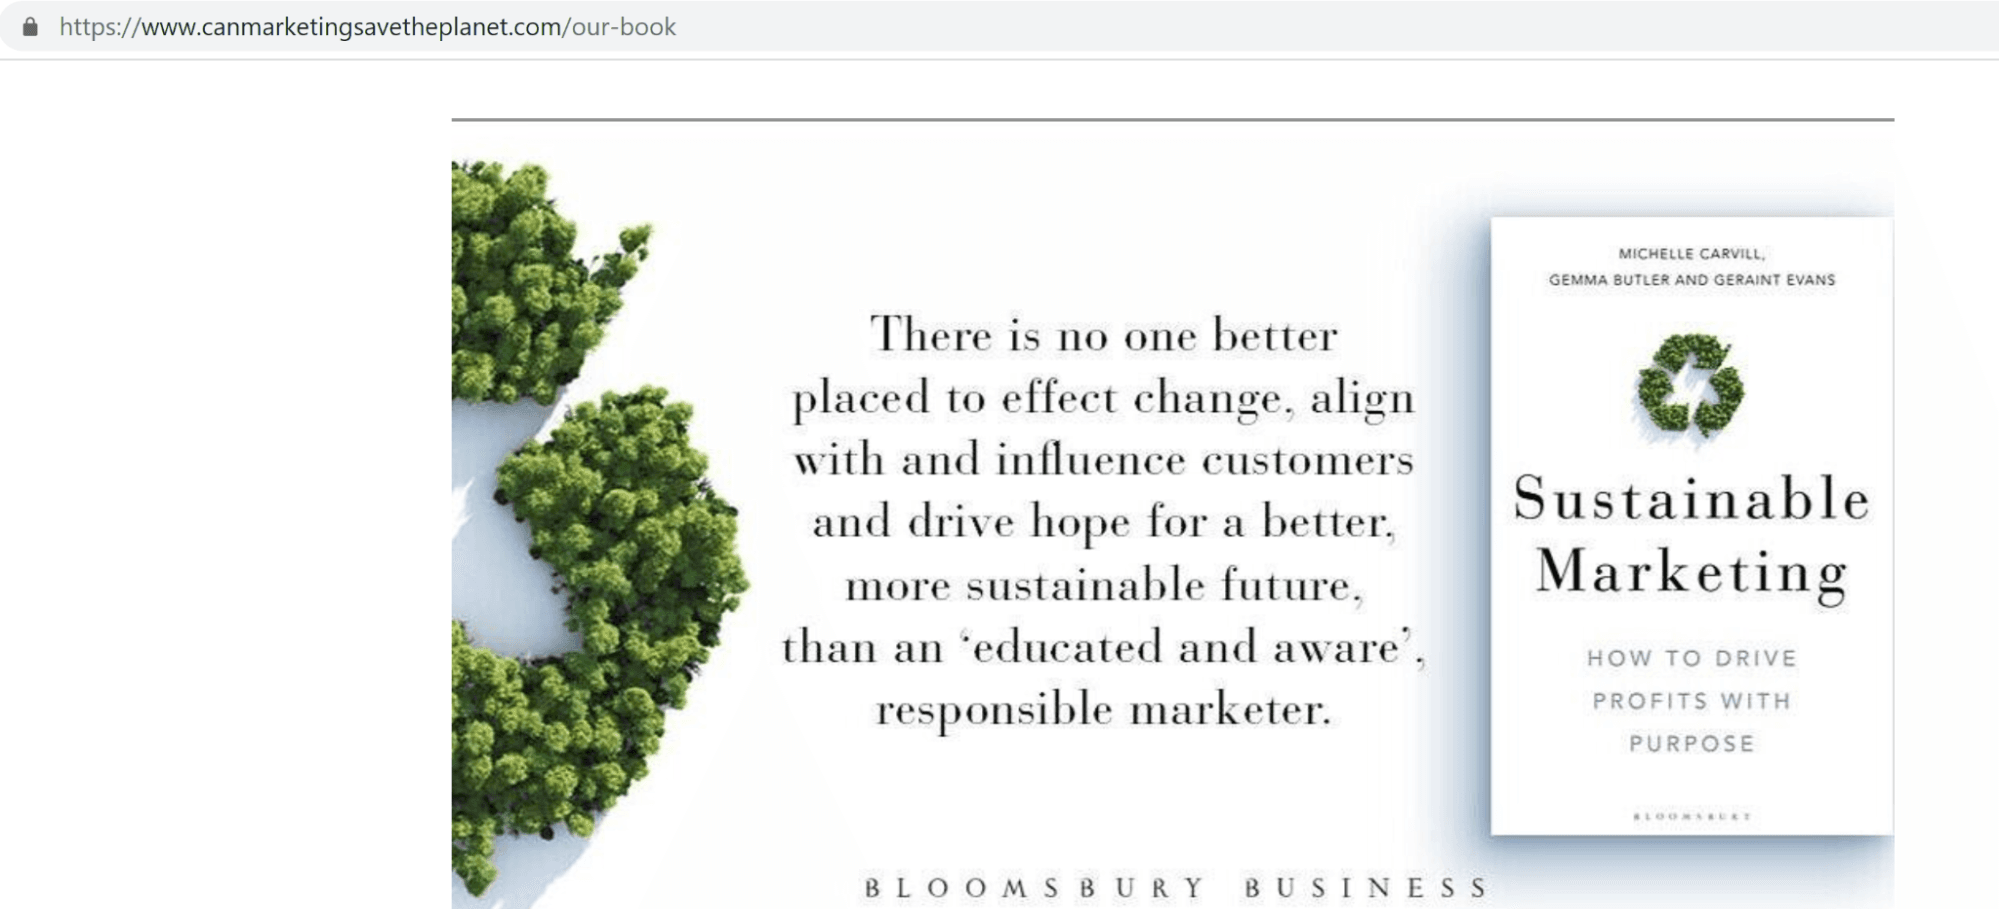 Screenshot of the landing page of the book "Sustainable Marketing - How to Drive Profits with Purpose", co-authored by Michelle Carvill and Gemma Butler.